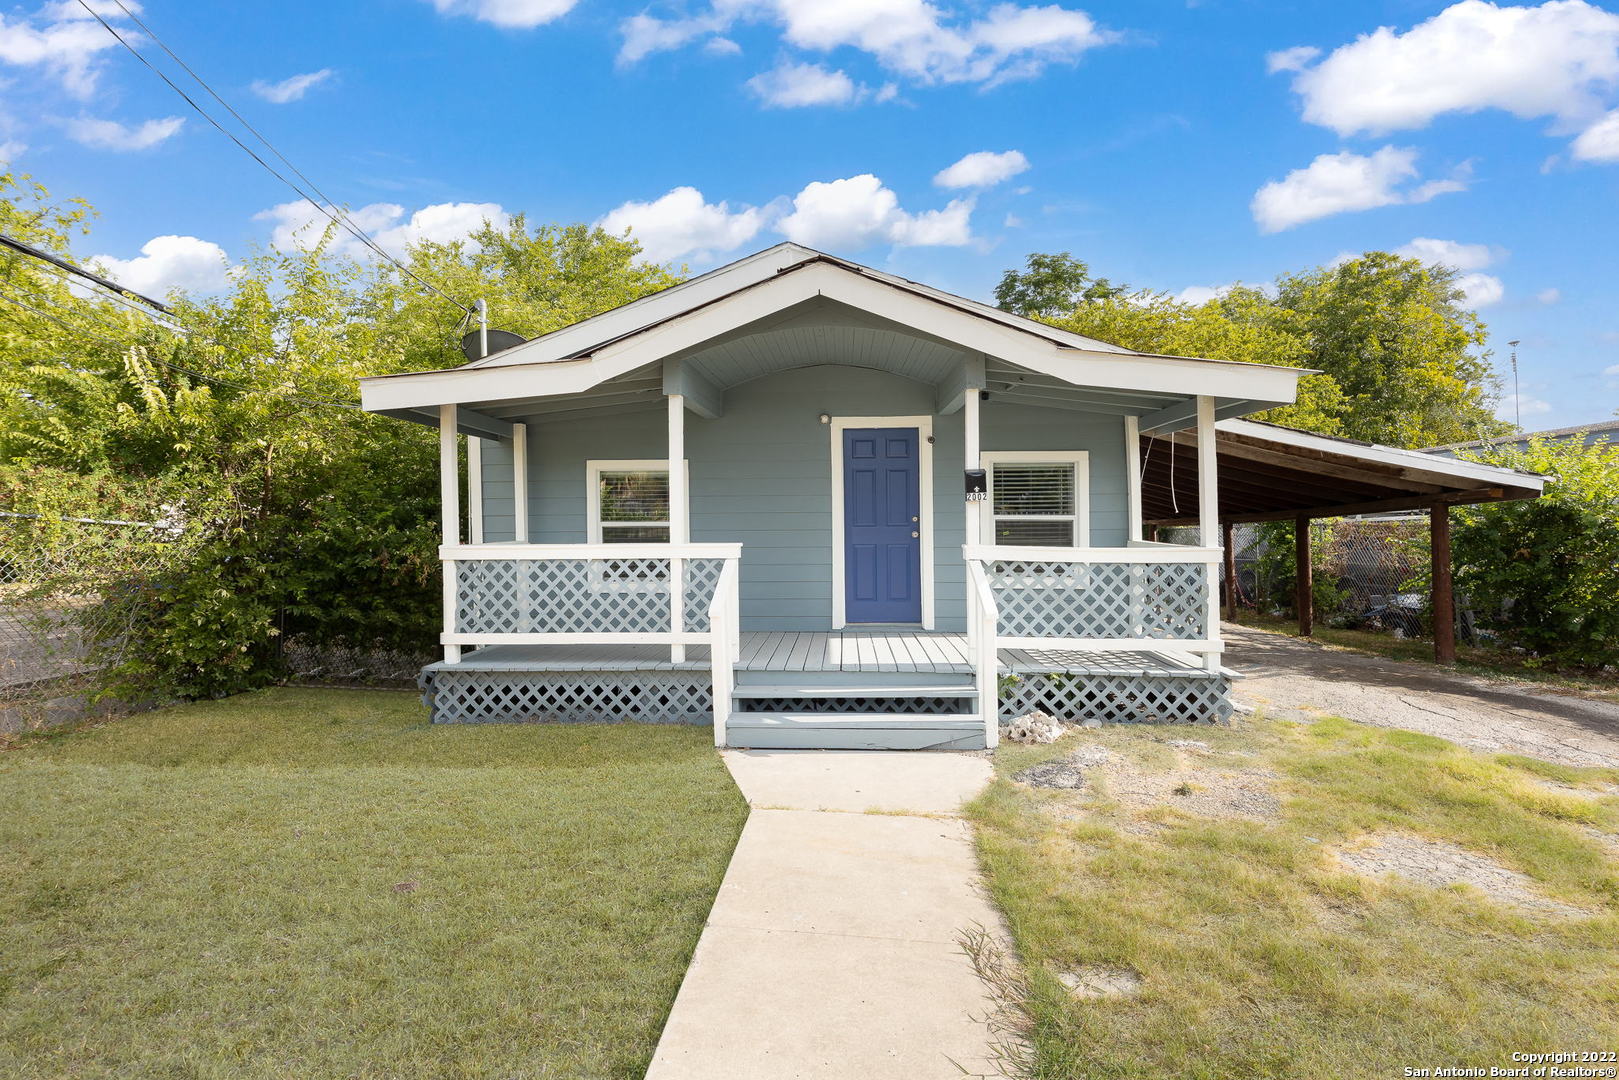 Come check out this recently remodeled property in the perfect central location! Close to St. Mary's University and Our Lady of the Lake, this house would be perfect for first time home buyers or college students. Located near Woodlawn Lake Park and downtown San Antonio, the location would be perfect for an active lifestyle or AirBnB opportunity.